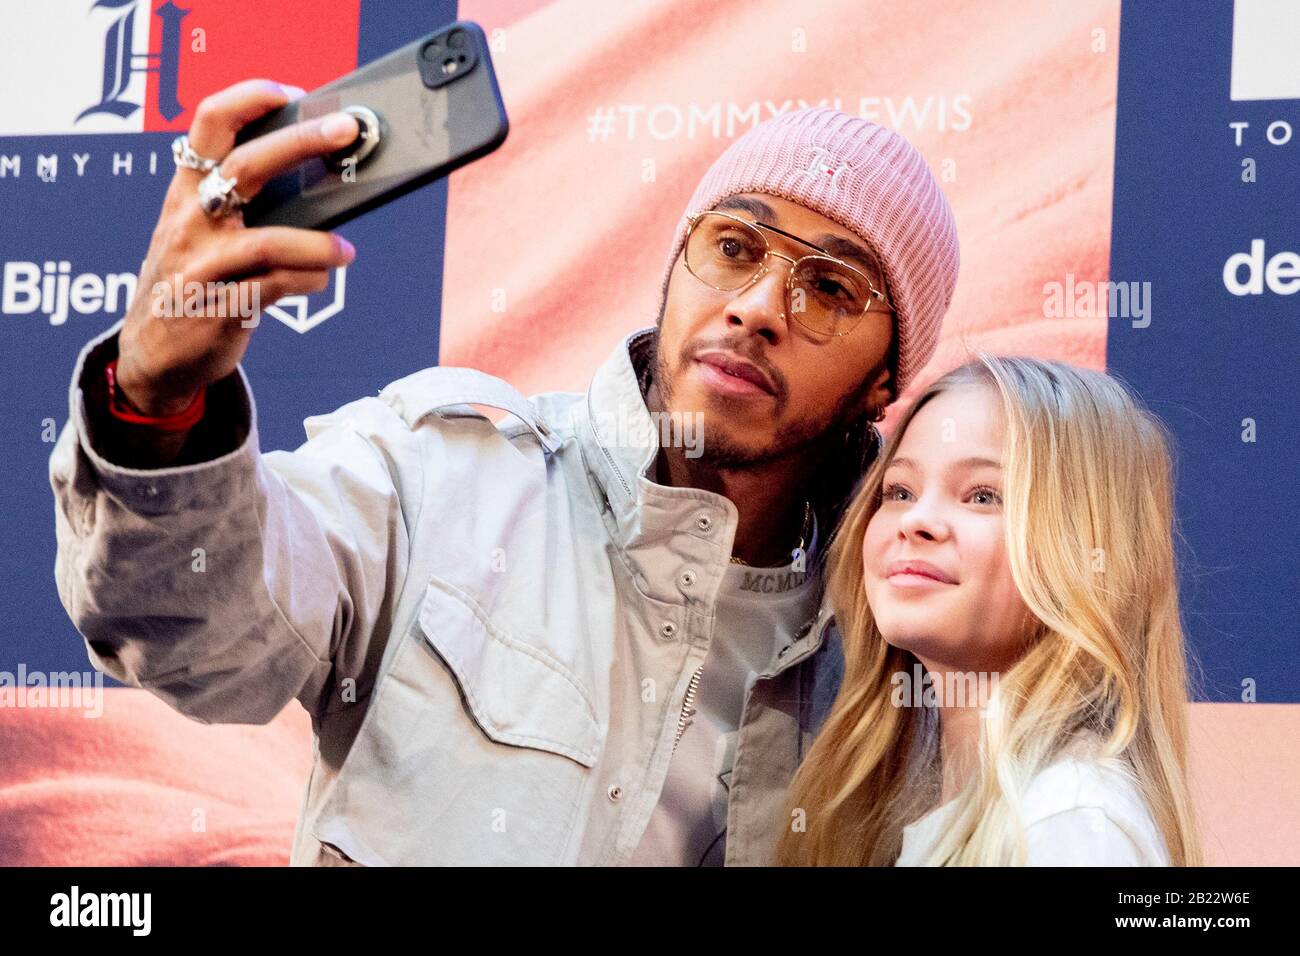 Amsterdam, Netherlands. 29th Feb, 2020. AMSTERDAM, Centre, 29-02-2020,  Lewis Hamilton celebrates the launch of TommyXLewis in the Bijenkorf in  Amsterdam Credit: Pro Shots/Alamy Live News Stock Photo - Alamy